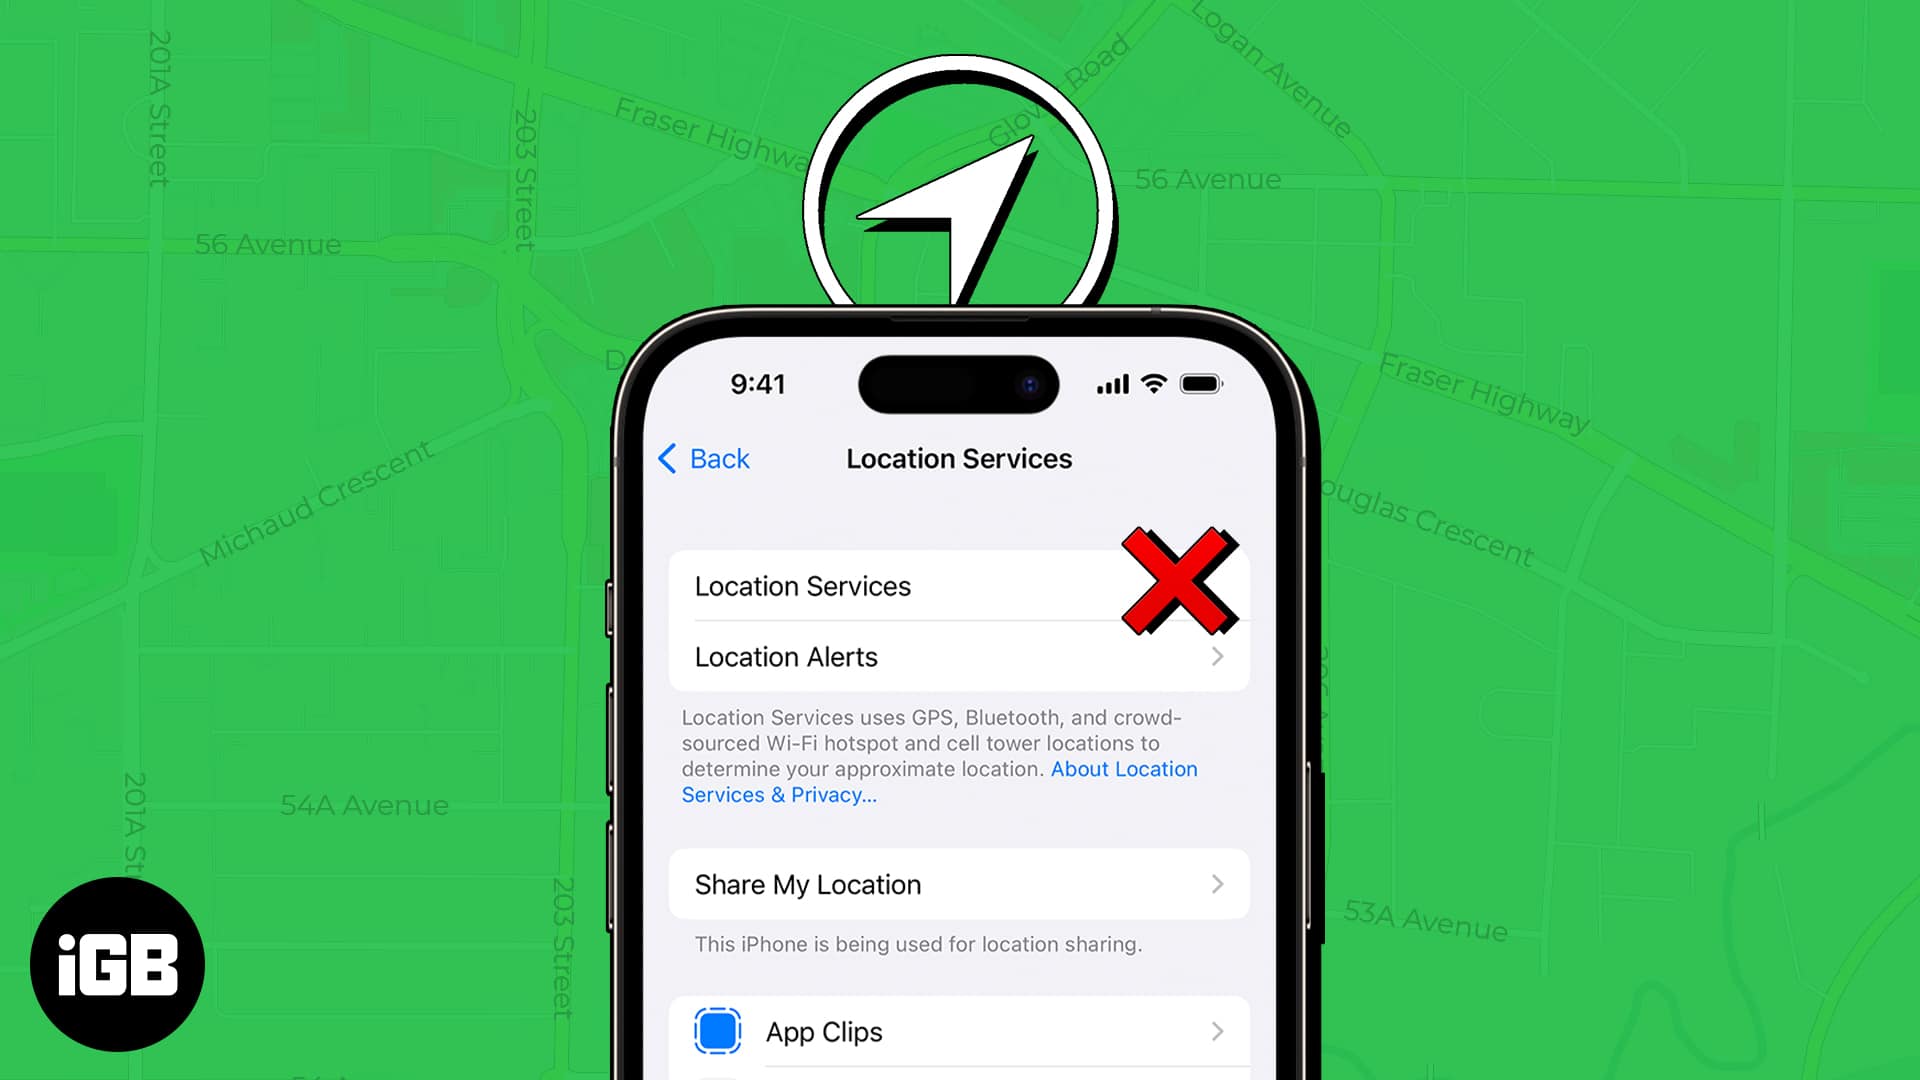 Fix location services not working on iphone